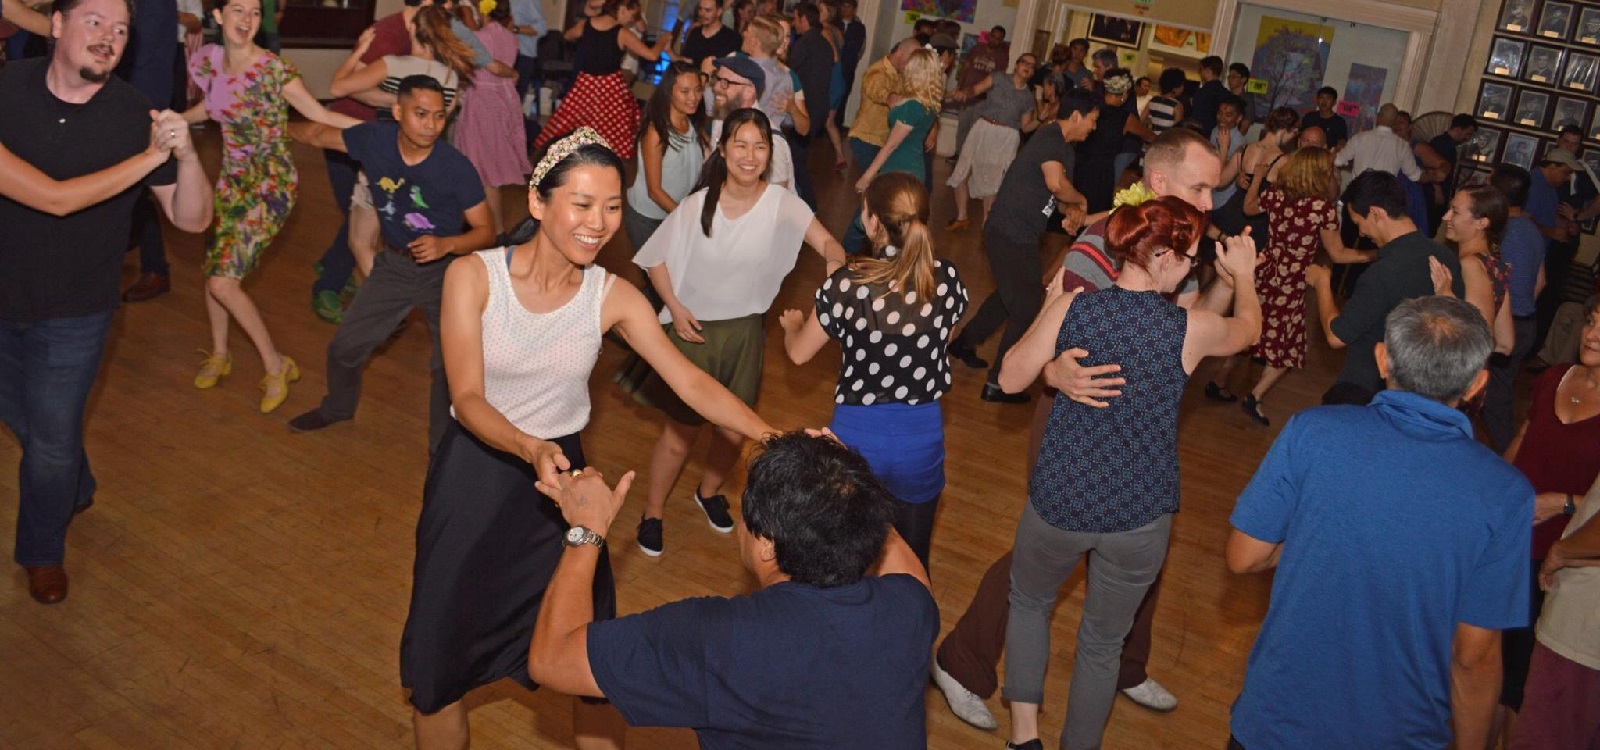 <div class='slider_caption'>
                                                     <h1>Come dance with us!  
No partner required!</h1>
<!--                                                     <a class='slider-readmore' href=''> -->
                                                                                                          </a>
                                                     </div>